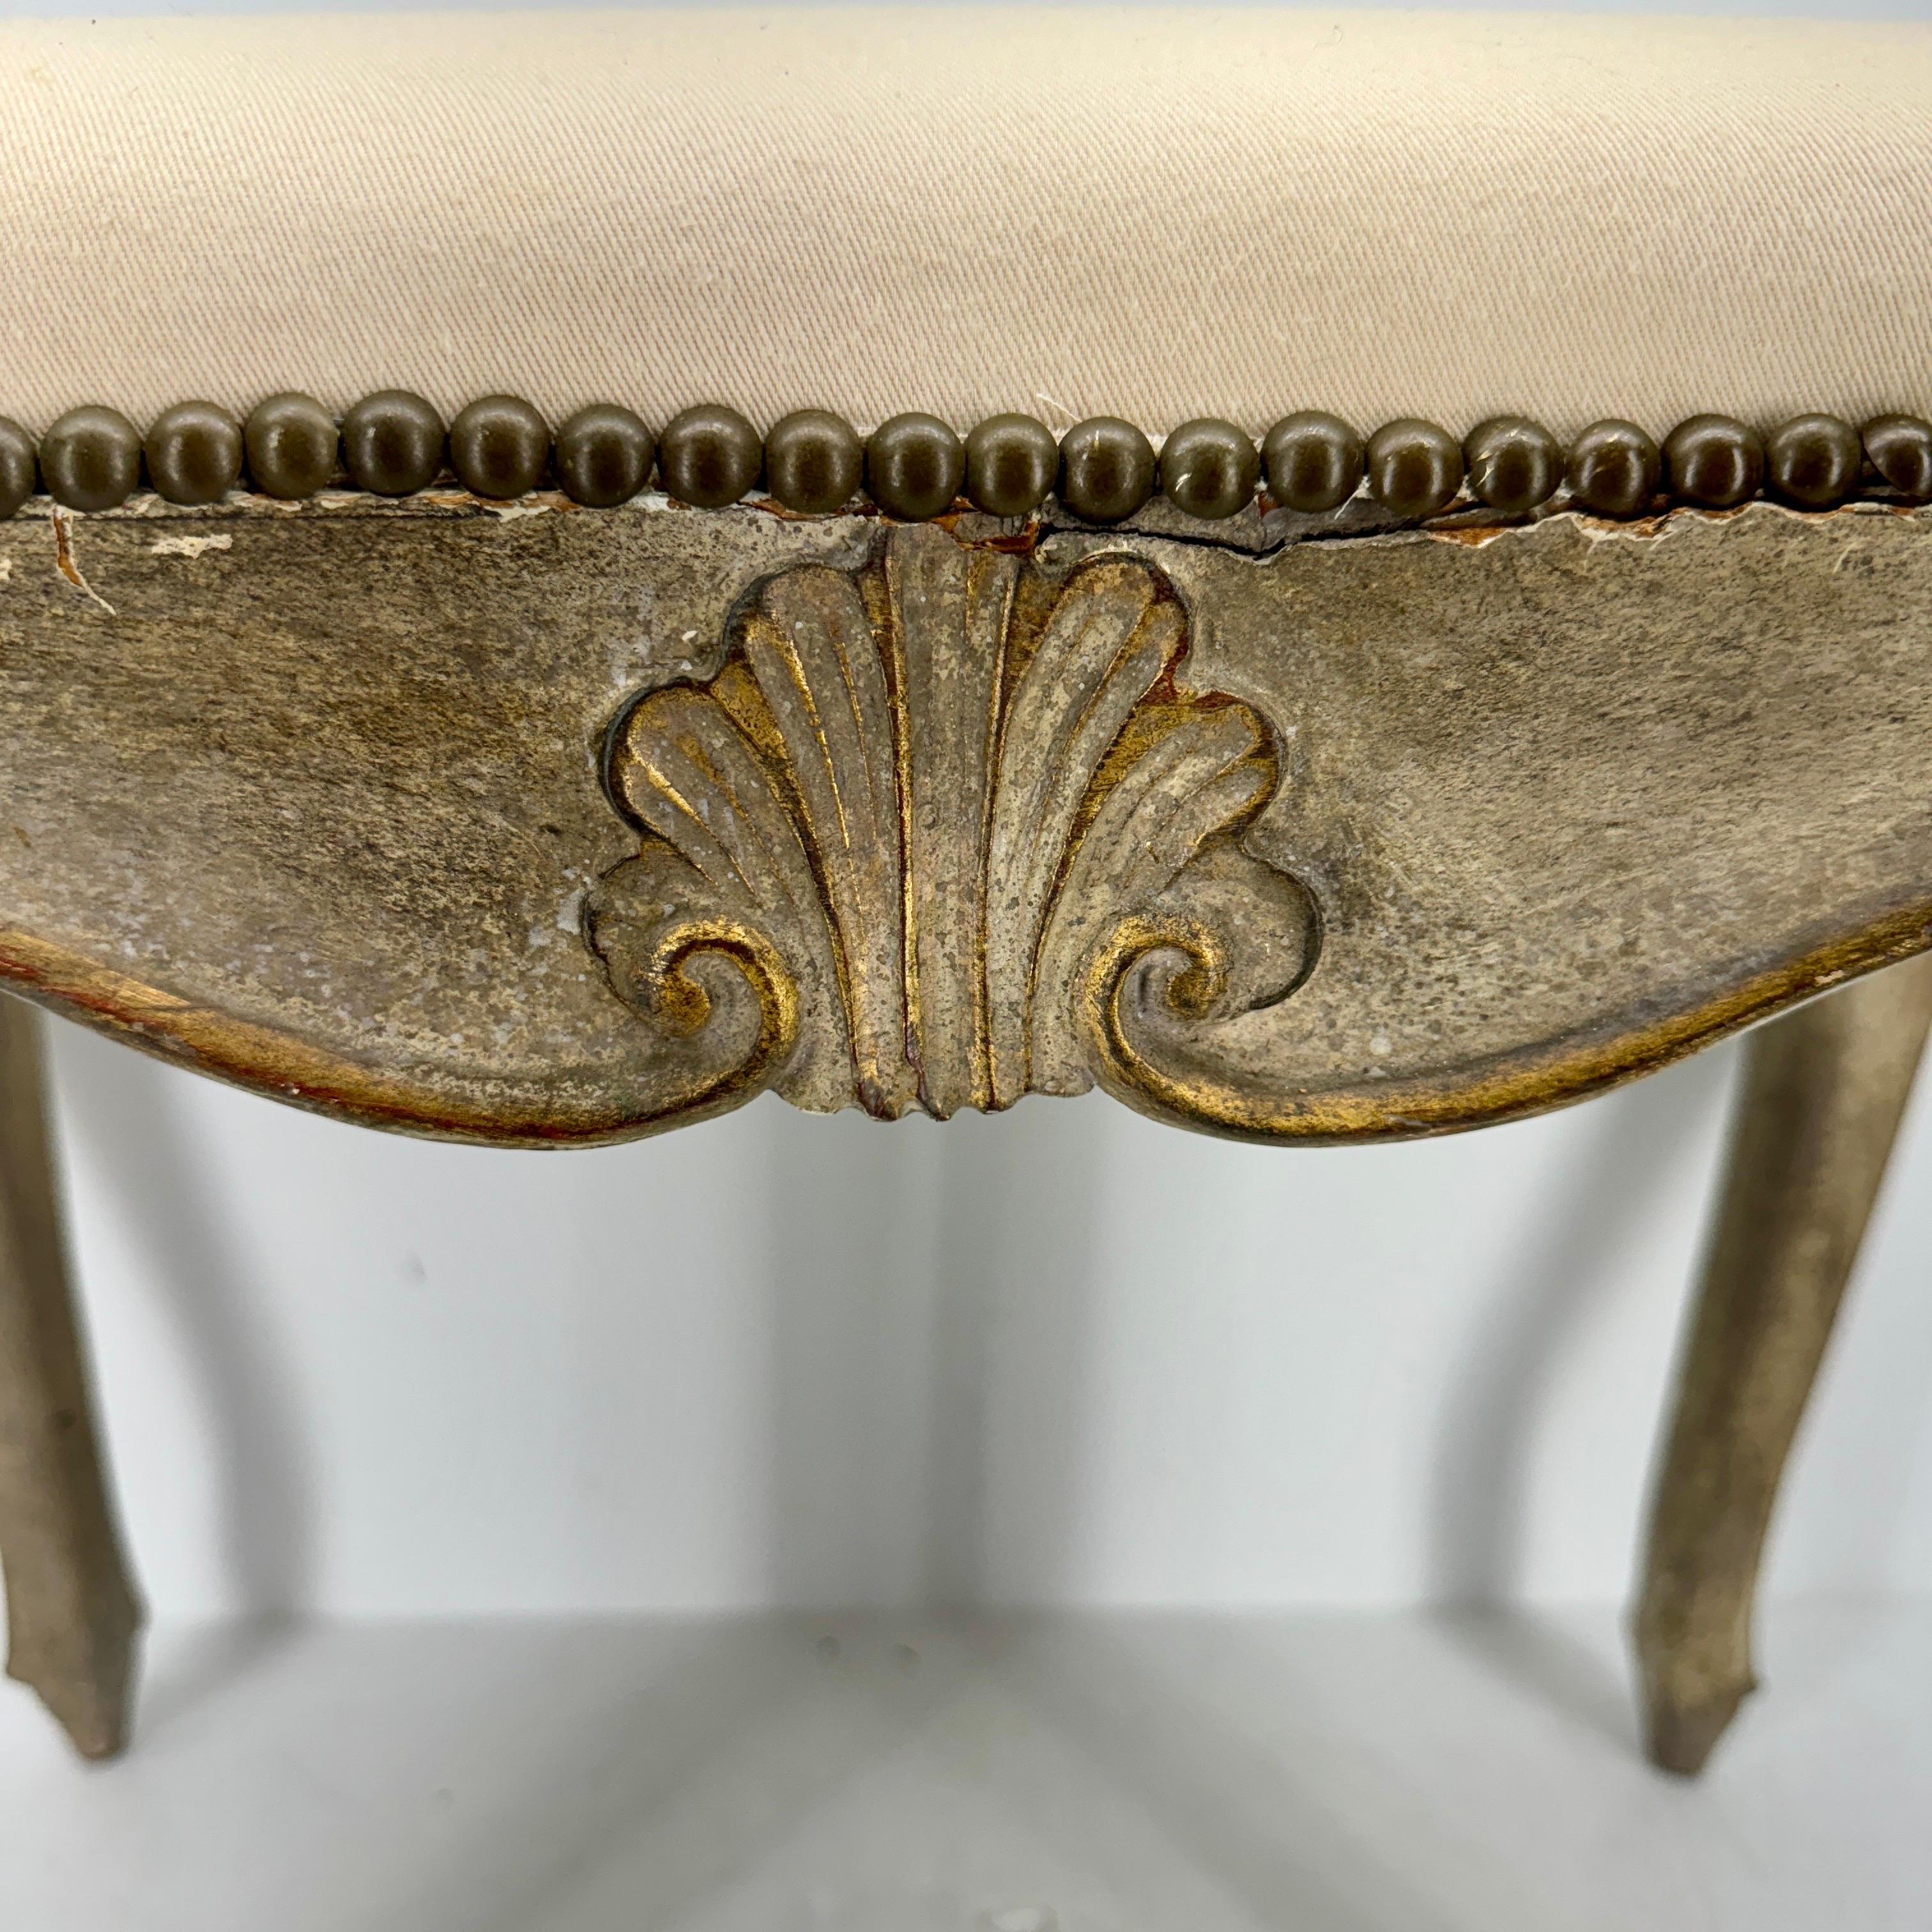 French Rococo Style Louis Vuitton Upholstered Bench with Rocaille In Good Condition For Sale In Haddonfield, NJ